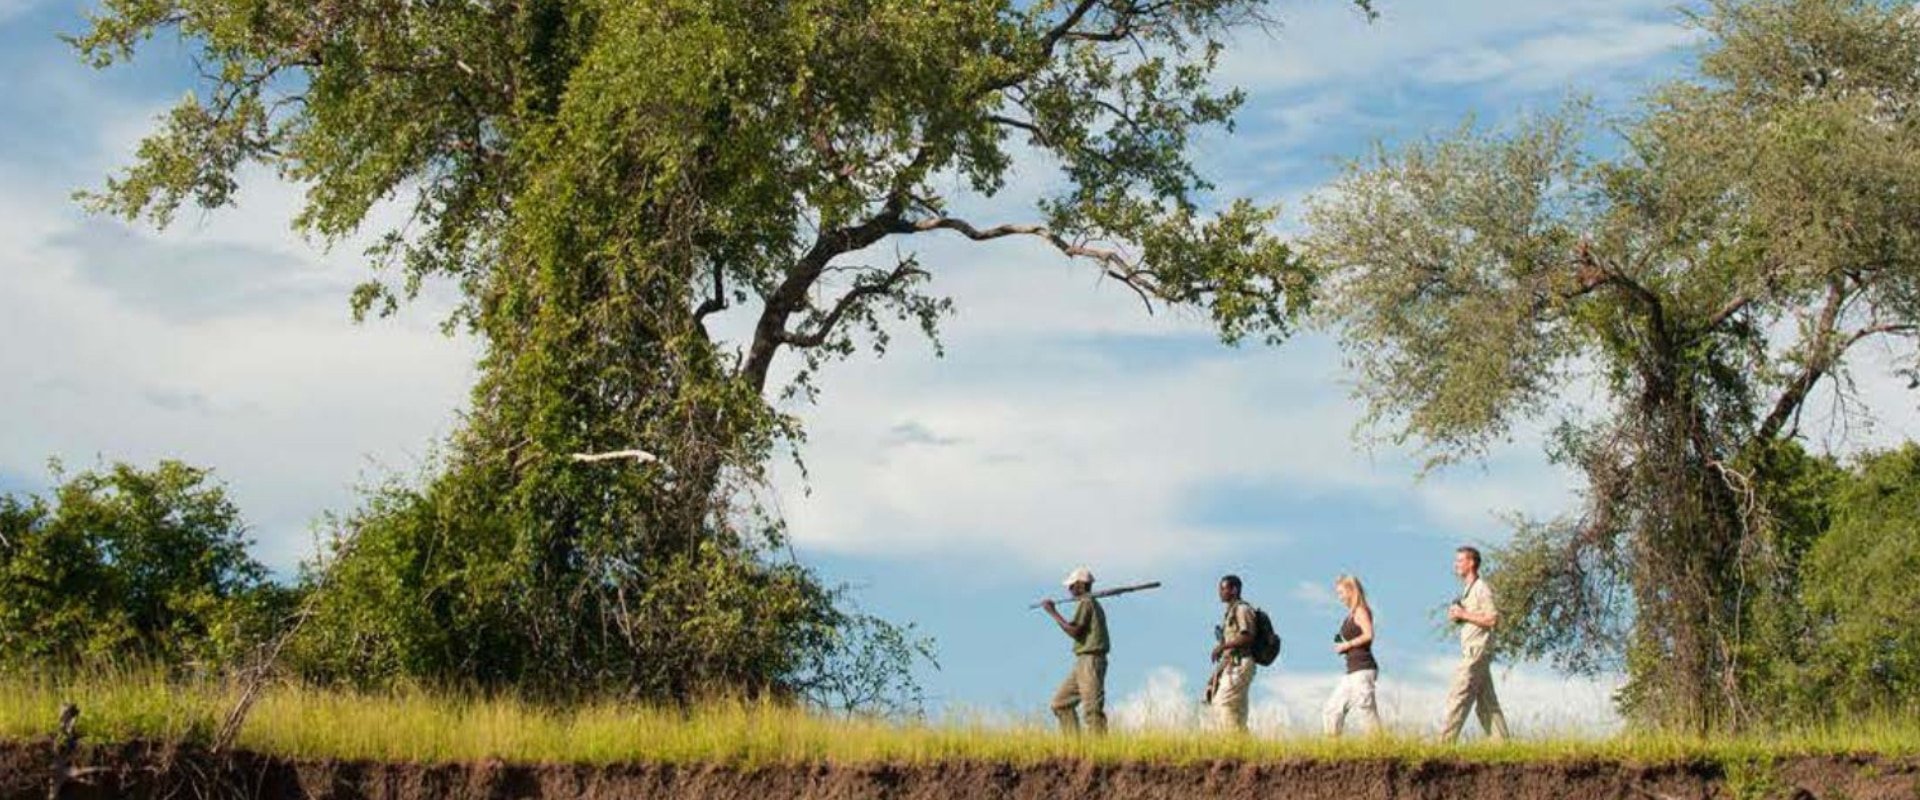 Explore the bush on foot to see all things big and small on a guided walking safari